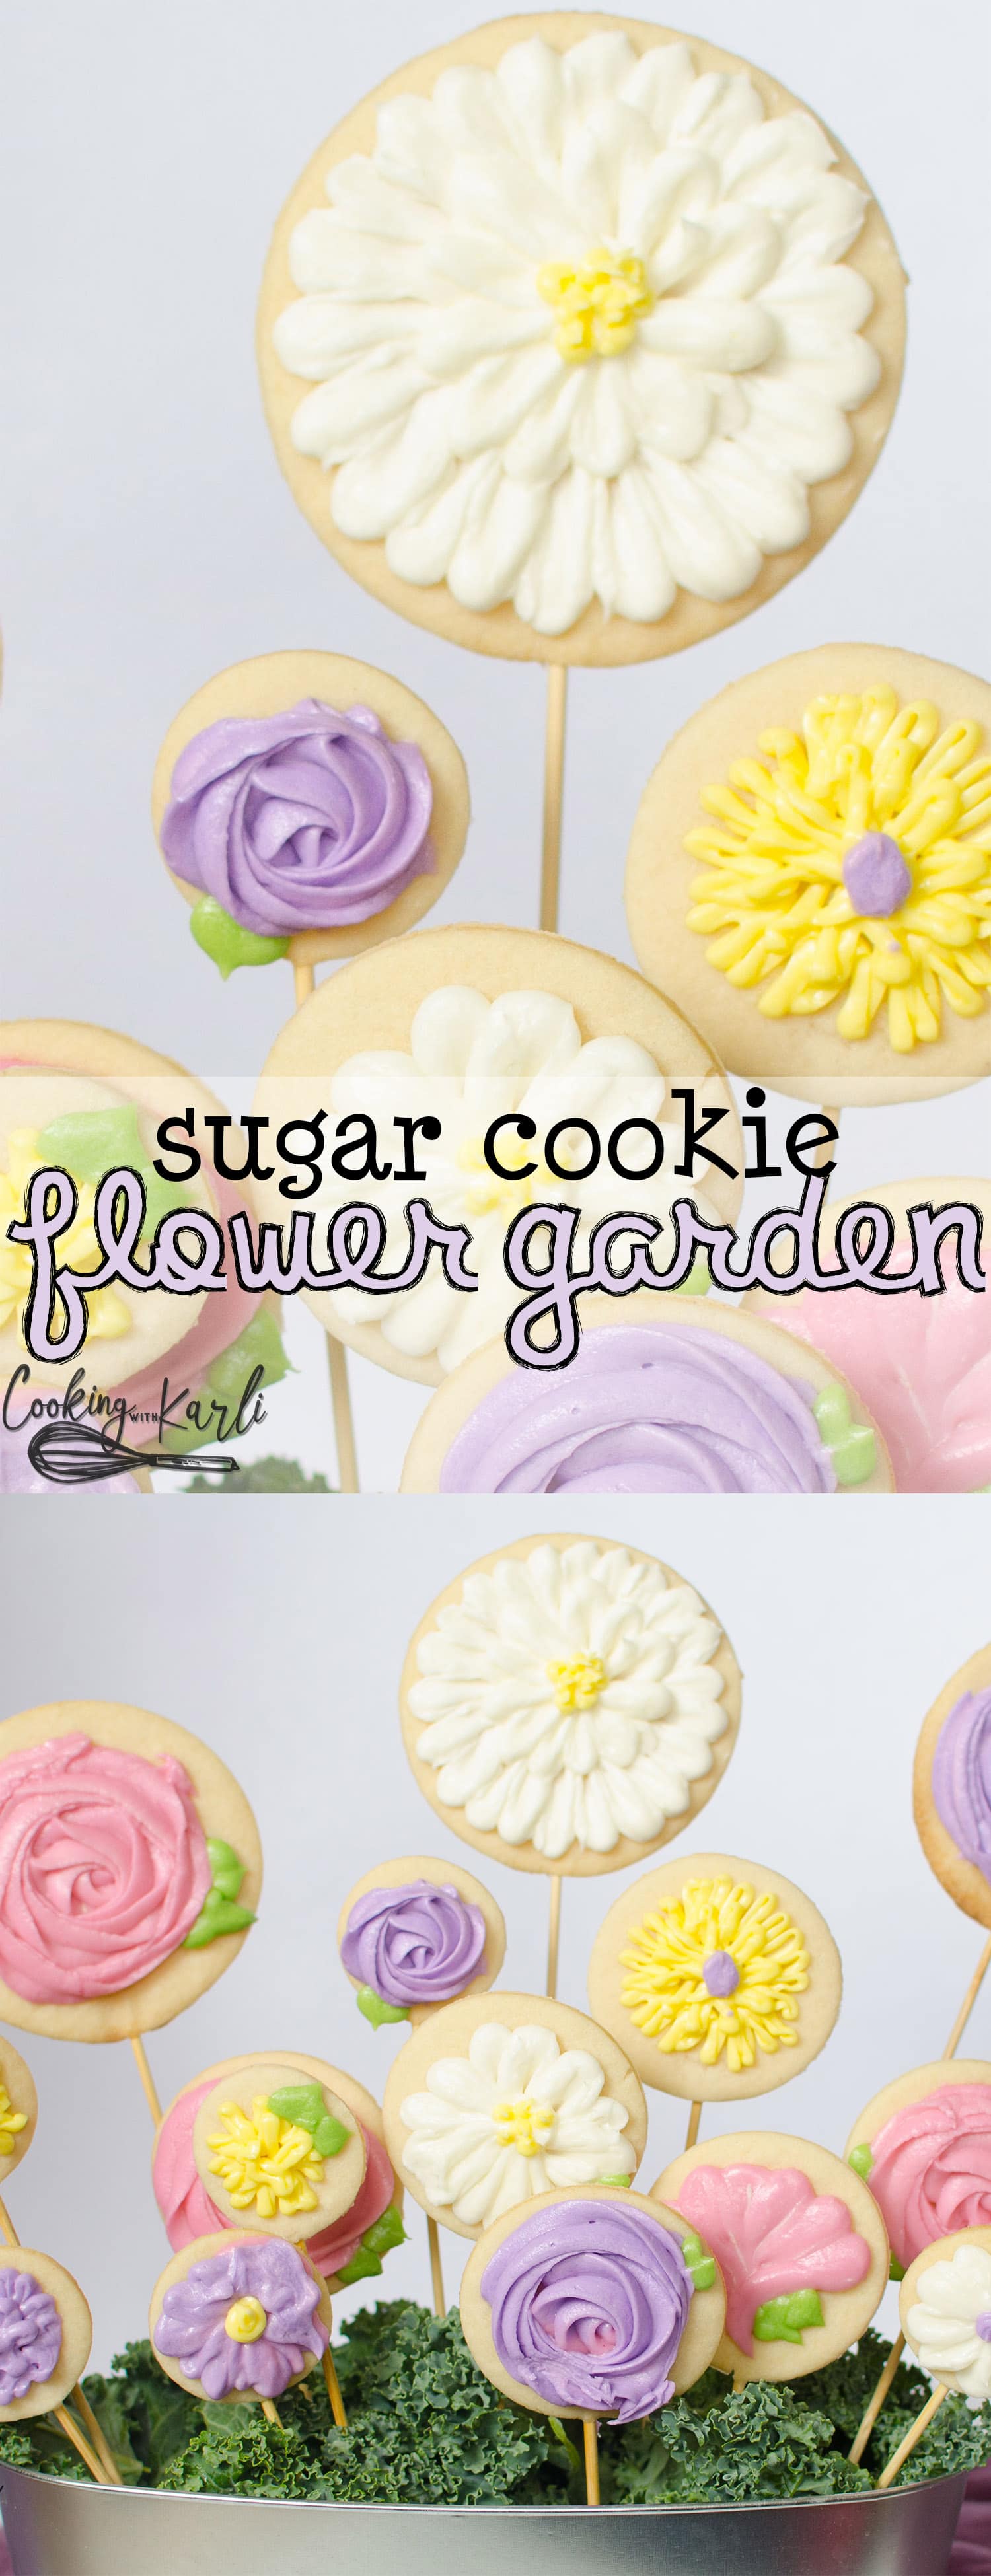 Sugar Cookie Flowers make the perfect Mother’s Day gift! Cut-out sugar cookies baked onto a skewer and decorated with buttercream frosting then arranged in a pot to look like a garden of flowers! |Cooking with Karli| #mothersday #gift #dessert #flowers #recipe #tutorial #howto #diy #sugarcookies #buttercream